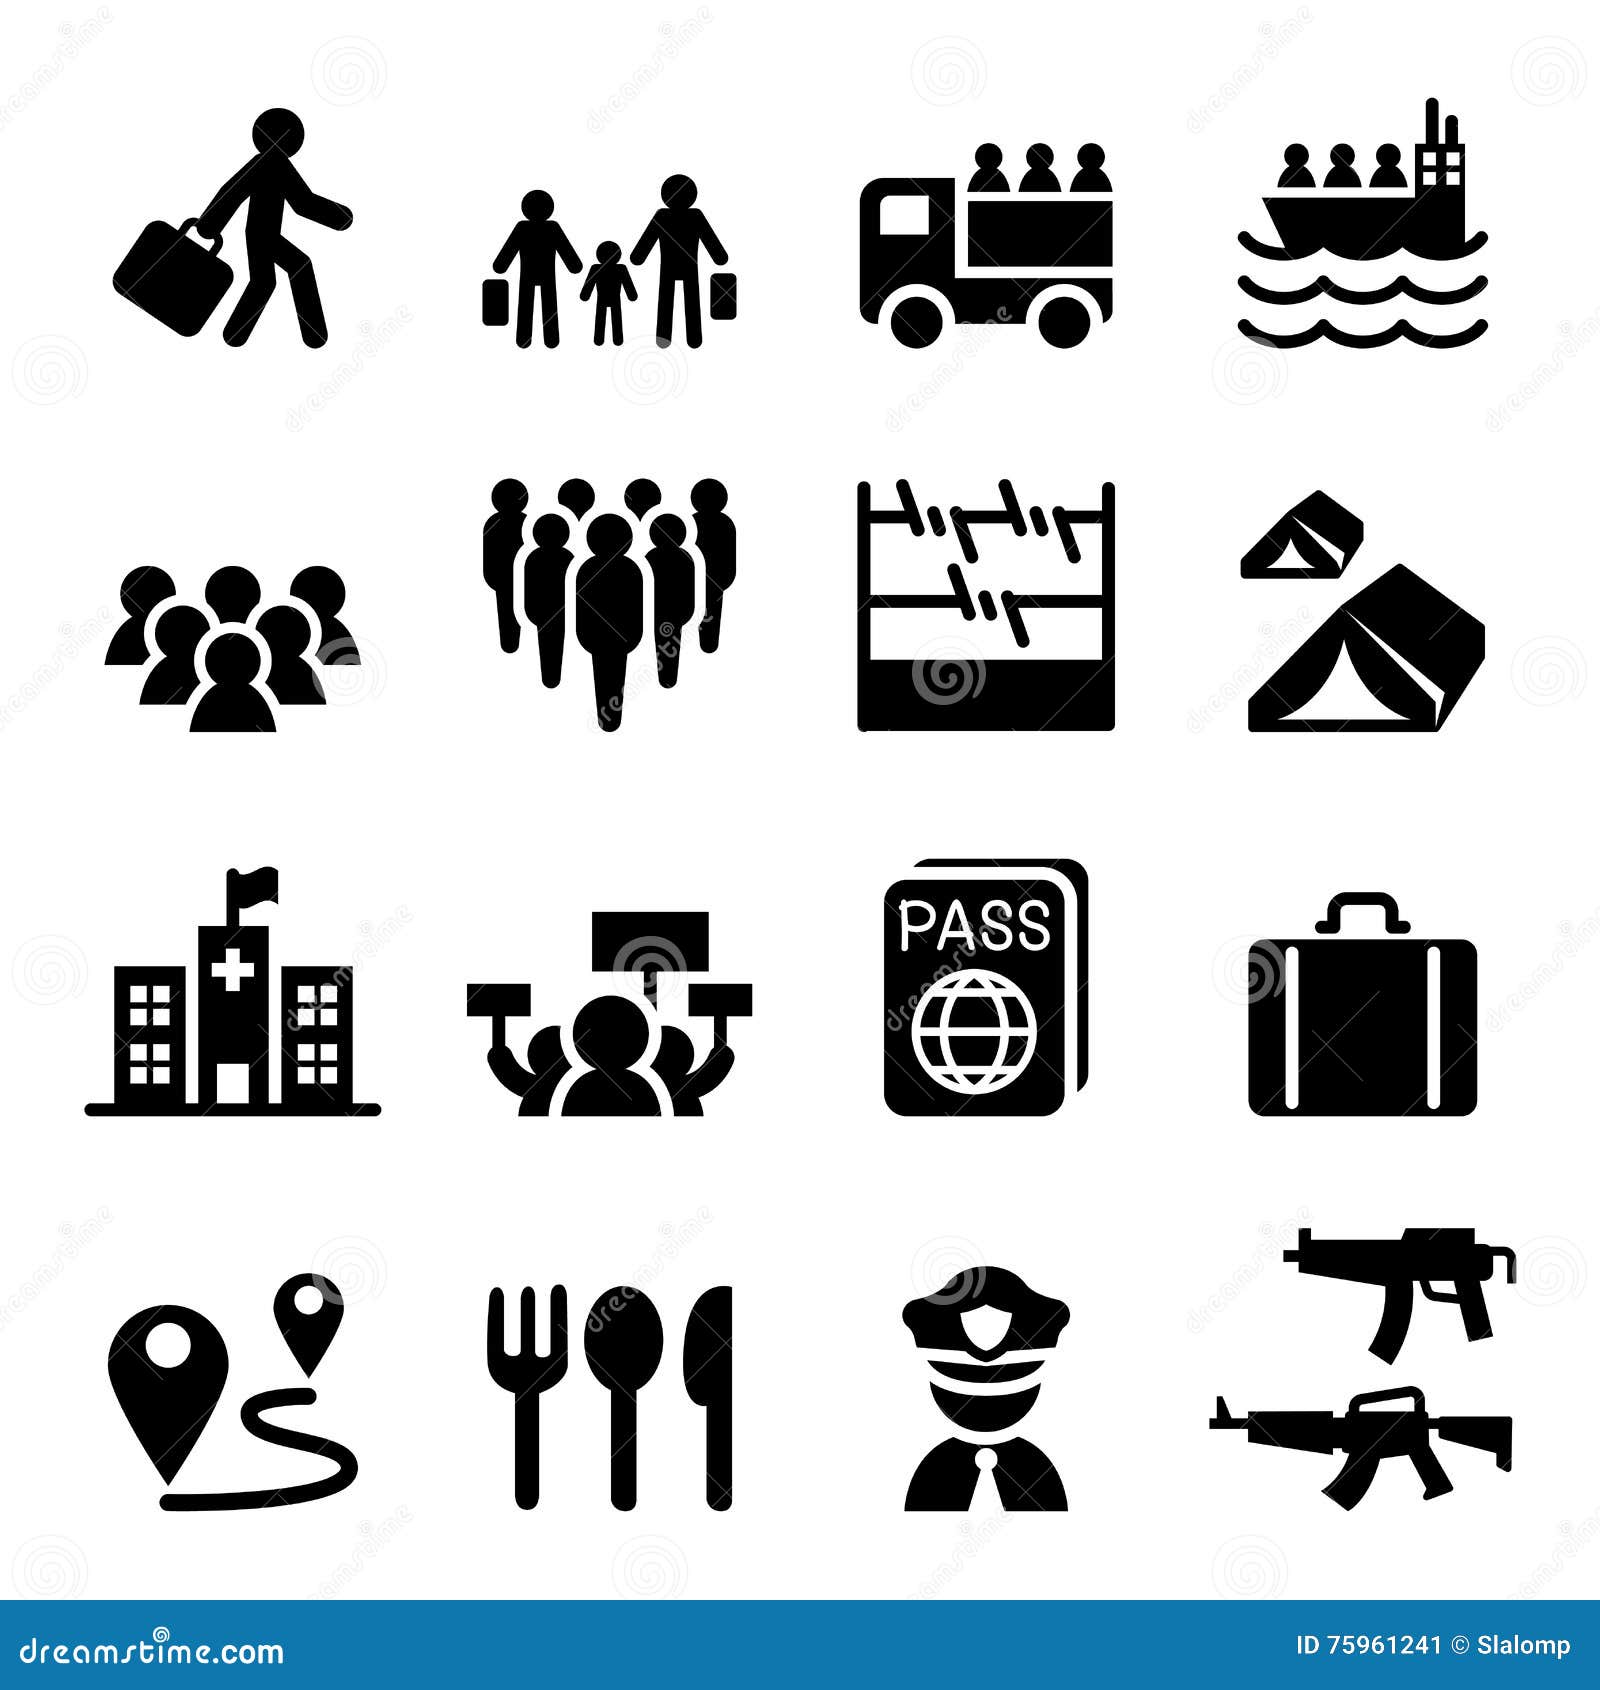 refugee, immigrants, immigration icons set